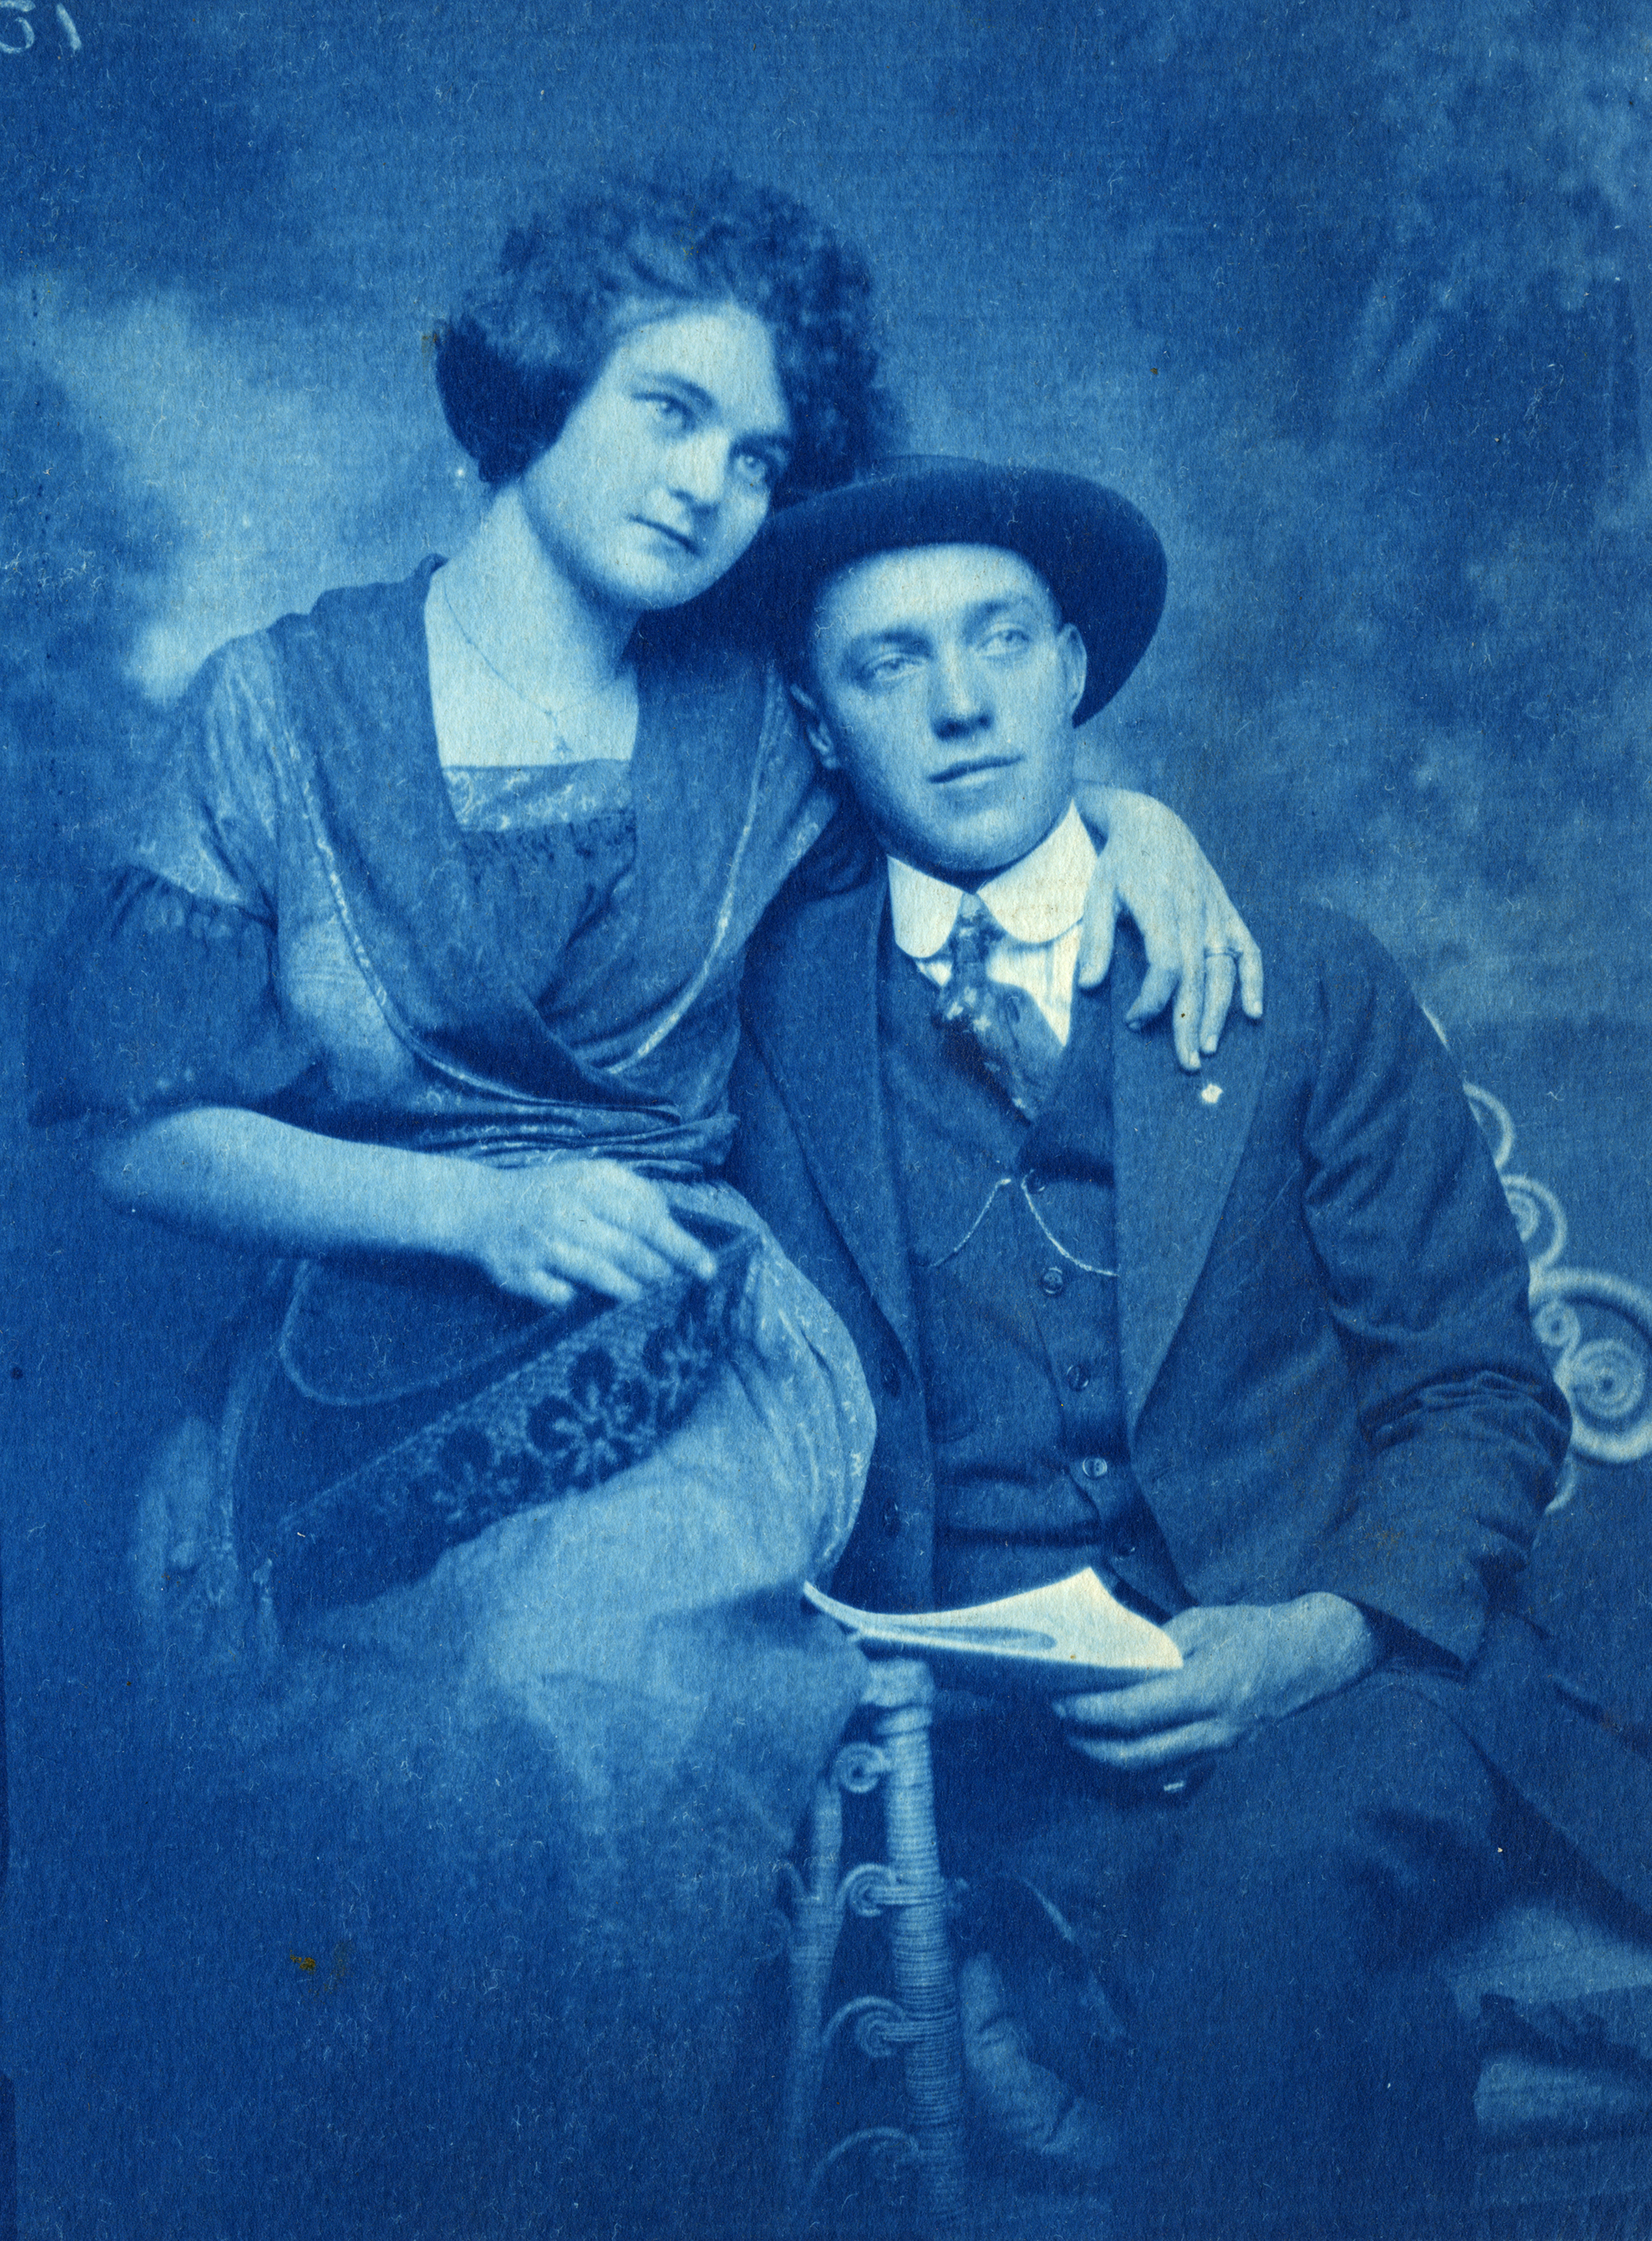 A young couple photographed at the Aultman Studio in Trinidad, Colorado about 1928